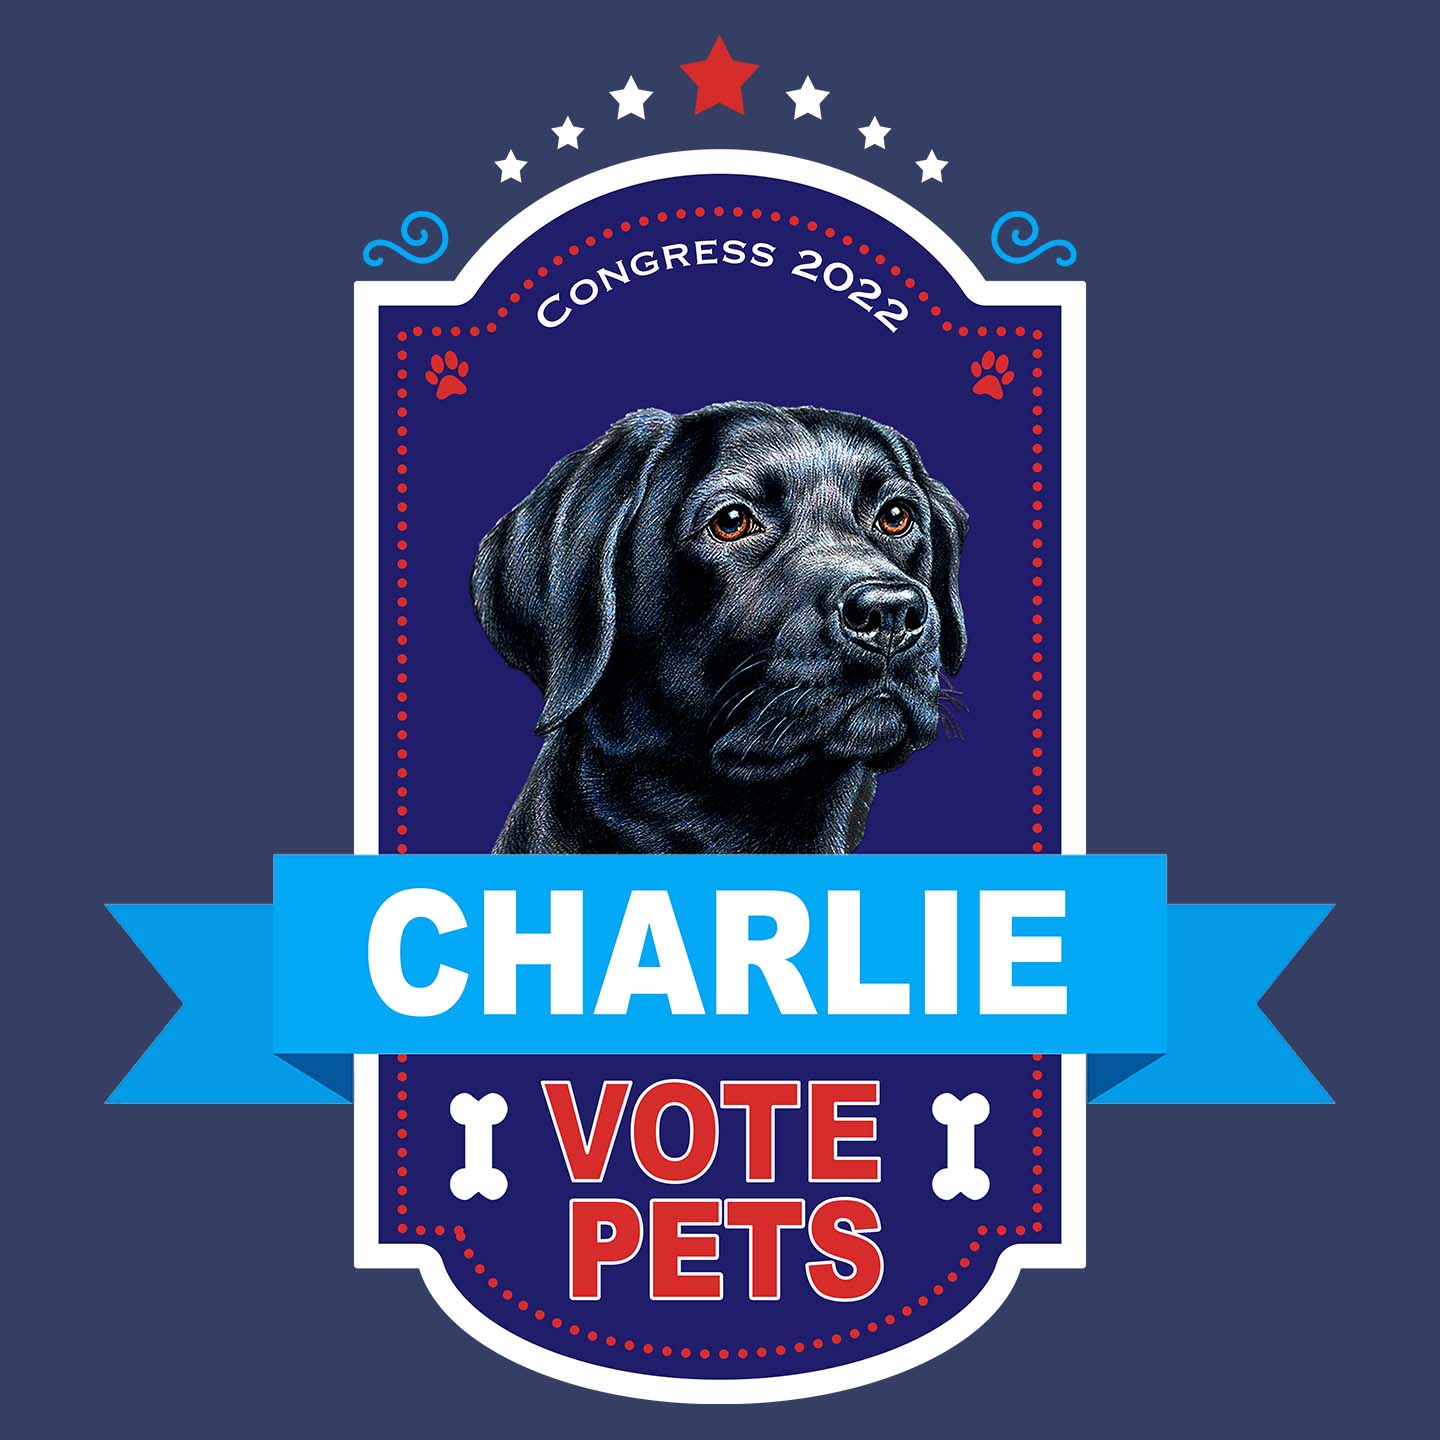 Vote Pets Candidate - Personalized Custom Adult Unisex Long Sleeve T-Shirt